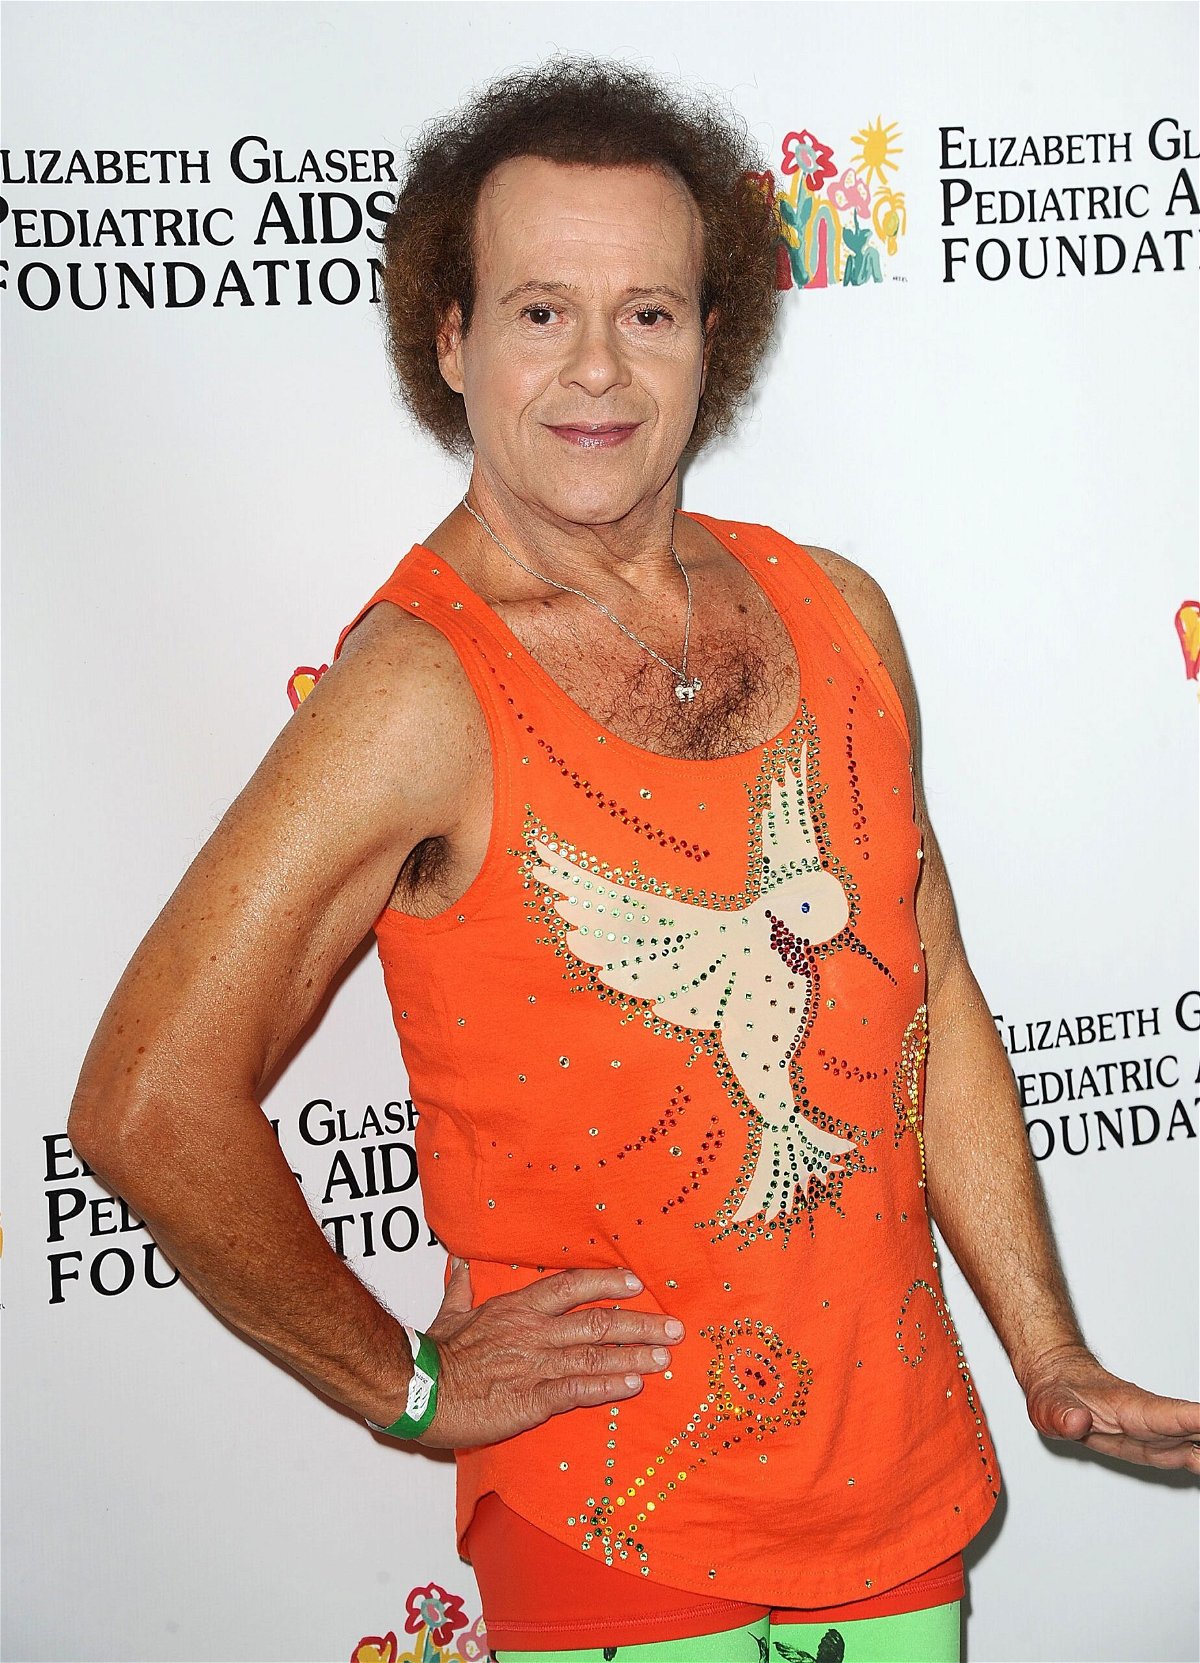 <i>Jason LaVeris/FilmMagic/Getty Images</i><br/>Richard Simmons at an event in Los Angeles in 2013. The fitness guru celebrated his birthday on July 13